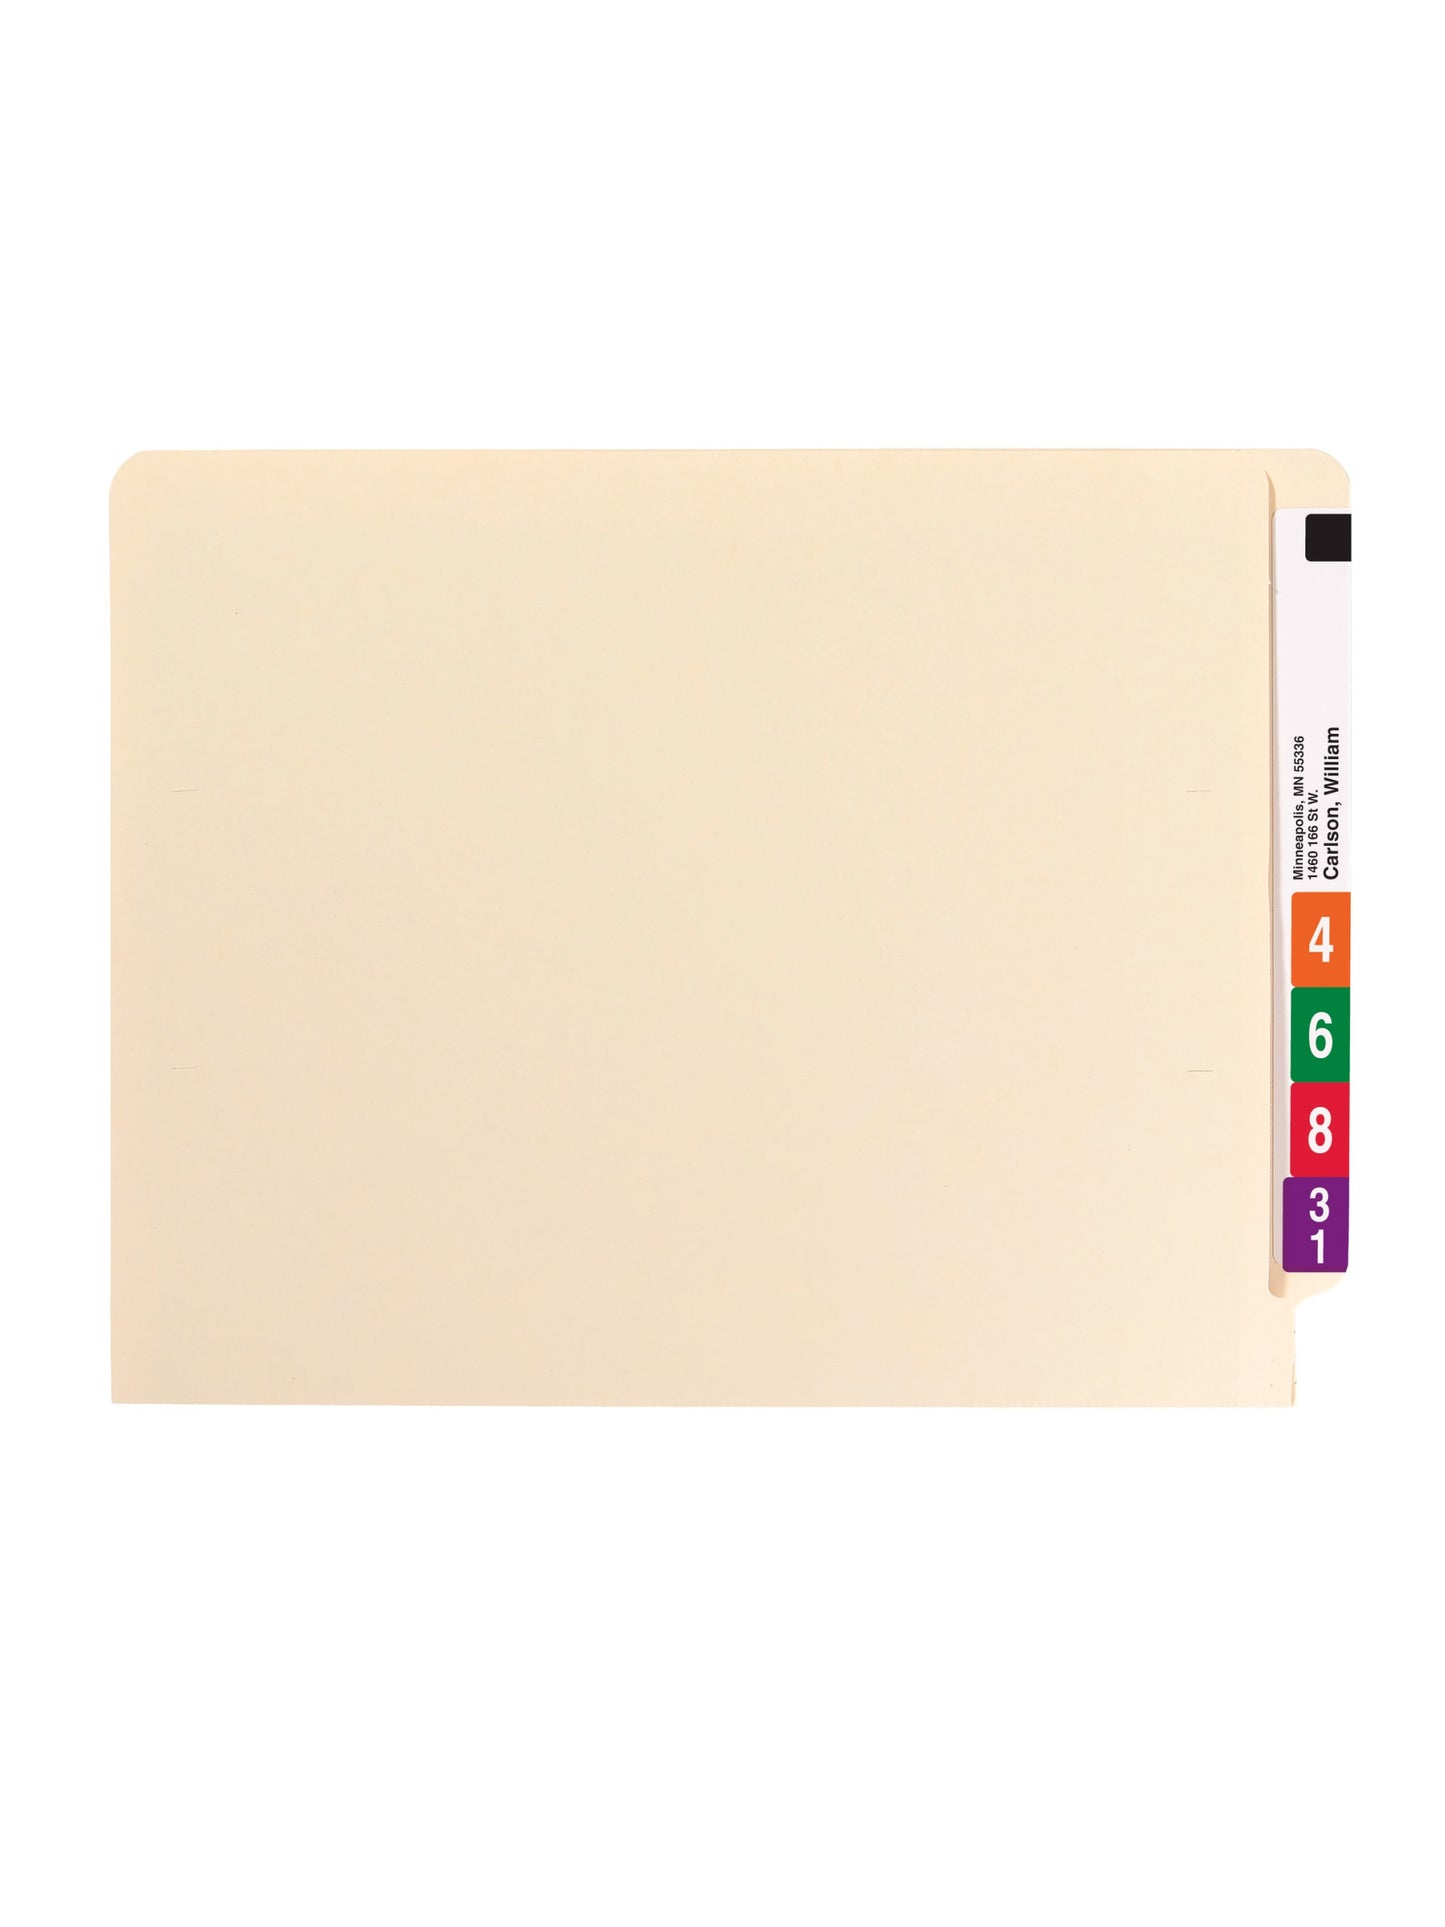 Shelf-Master® Reinforced End Tab Fastener File Folders with Antimicrobial Product Protection, Straight-Cut Tab, 2 Fasteners, Manila Color, Letter Size, Set of 50, 086486341165